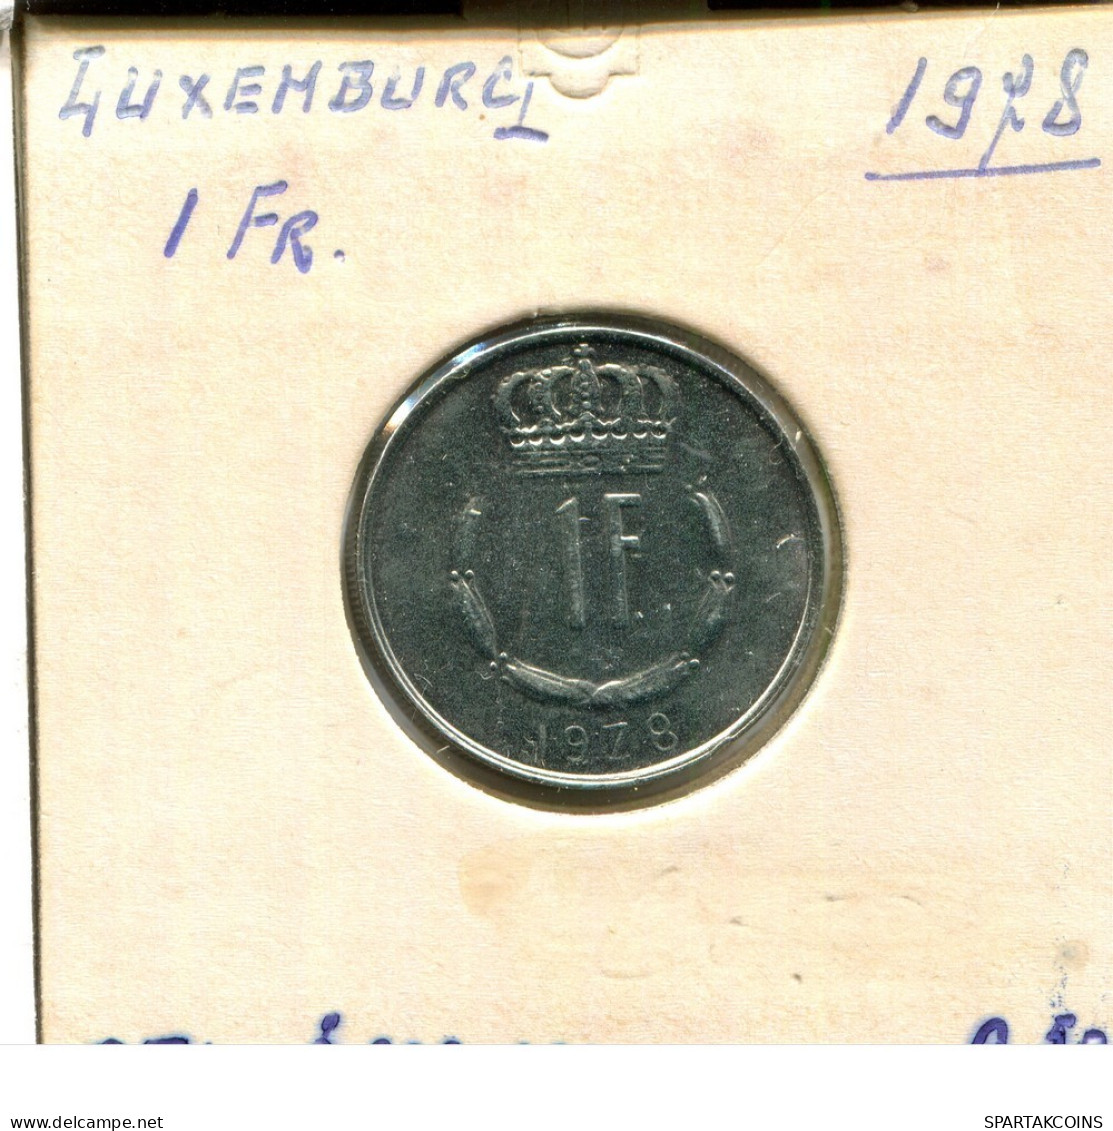 1 FRANC 1978 LUXEMBURG LUXEMBOURG Münze #AT214.D.A - Luxemburgo